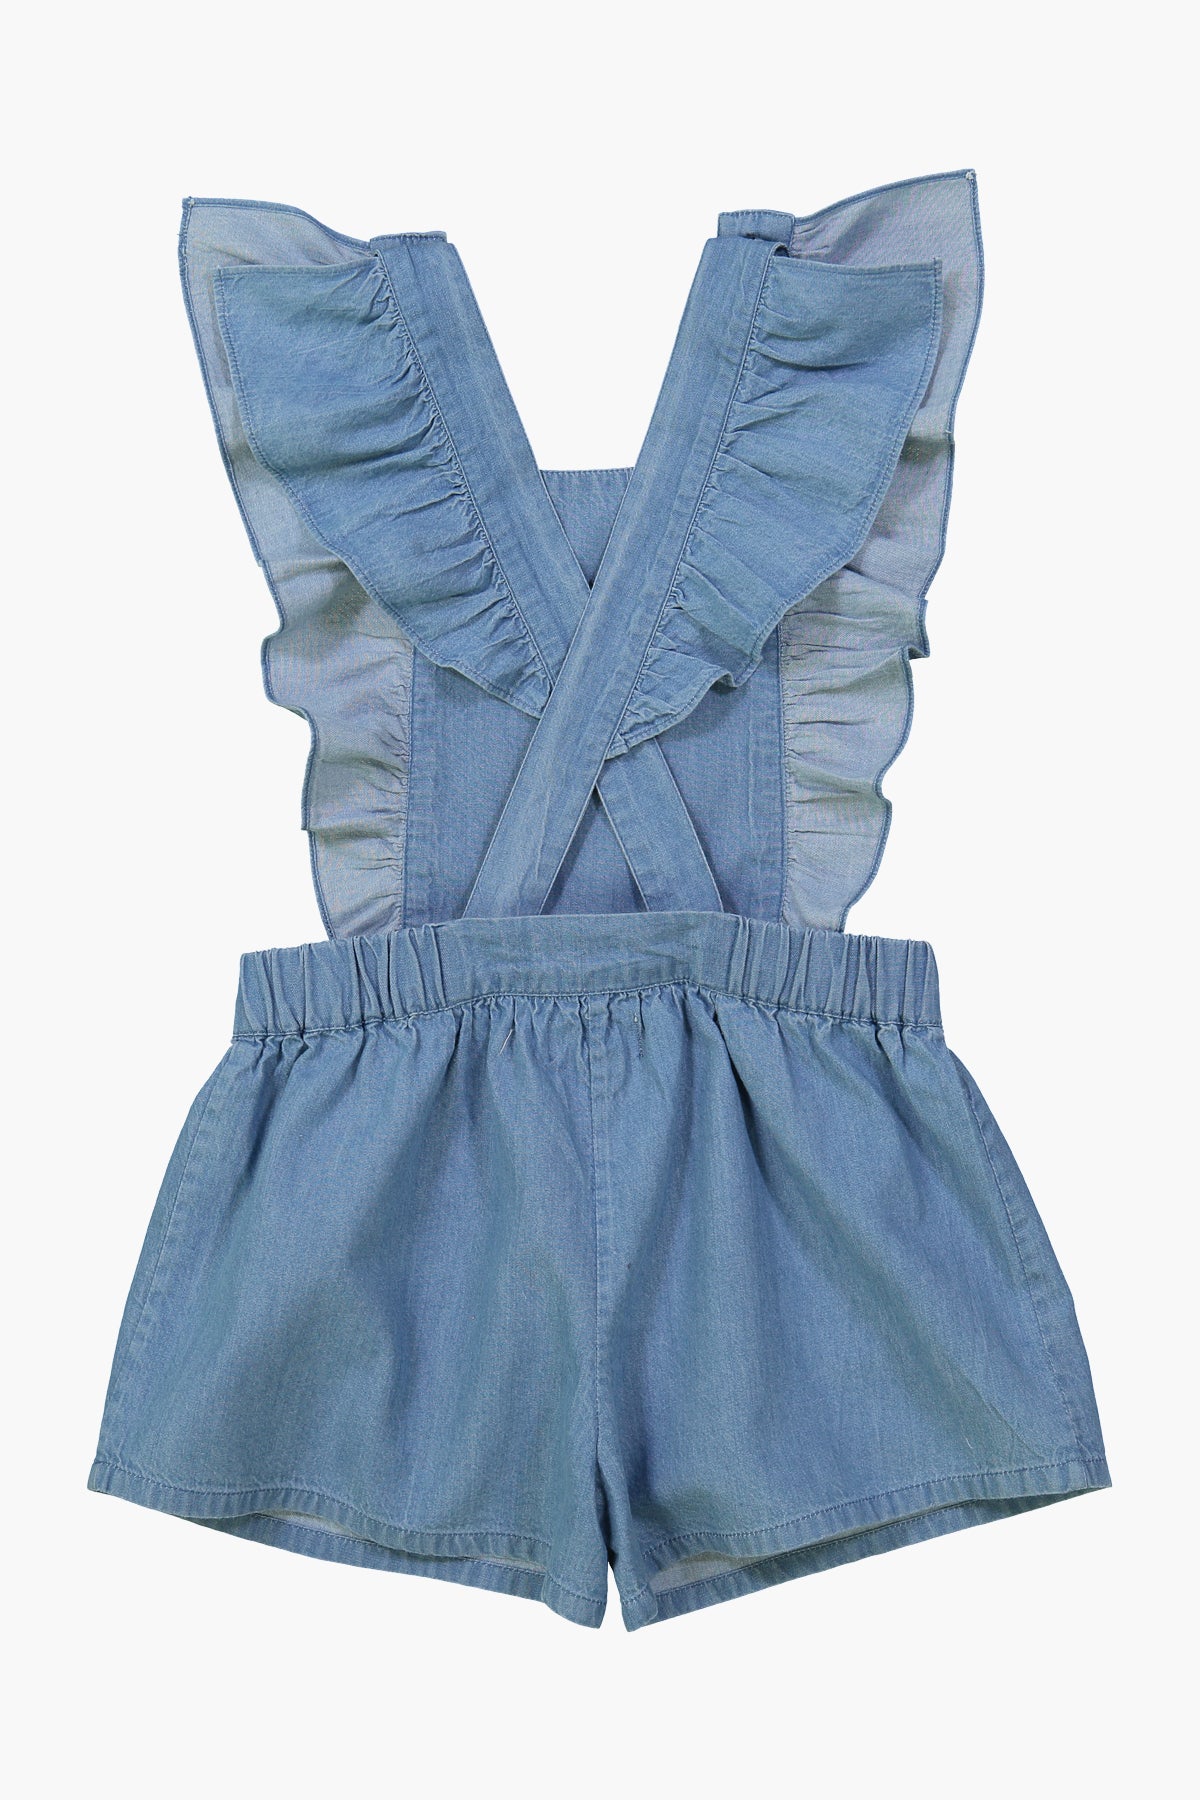 Louis Louise Cleopatre Girls Overall Romper – Mini Ruby